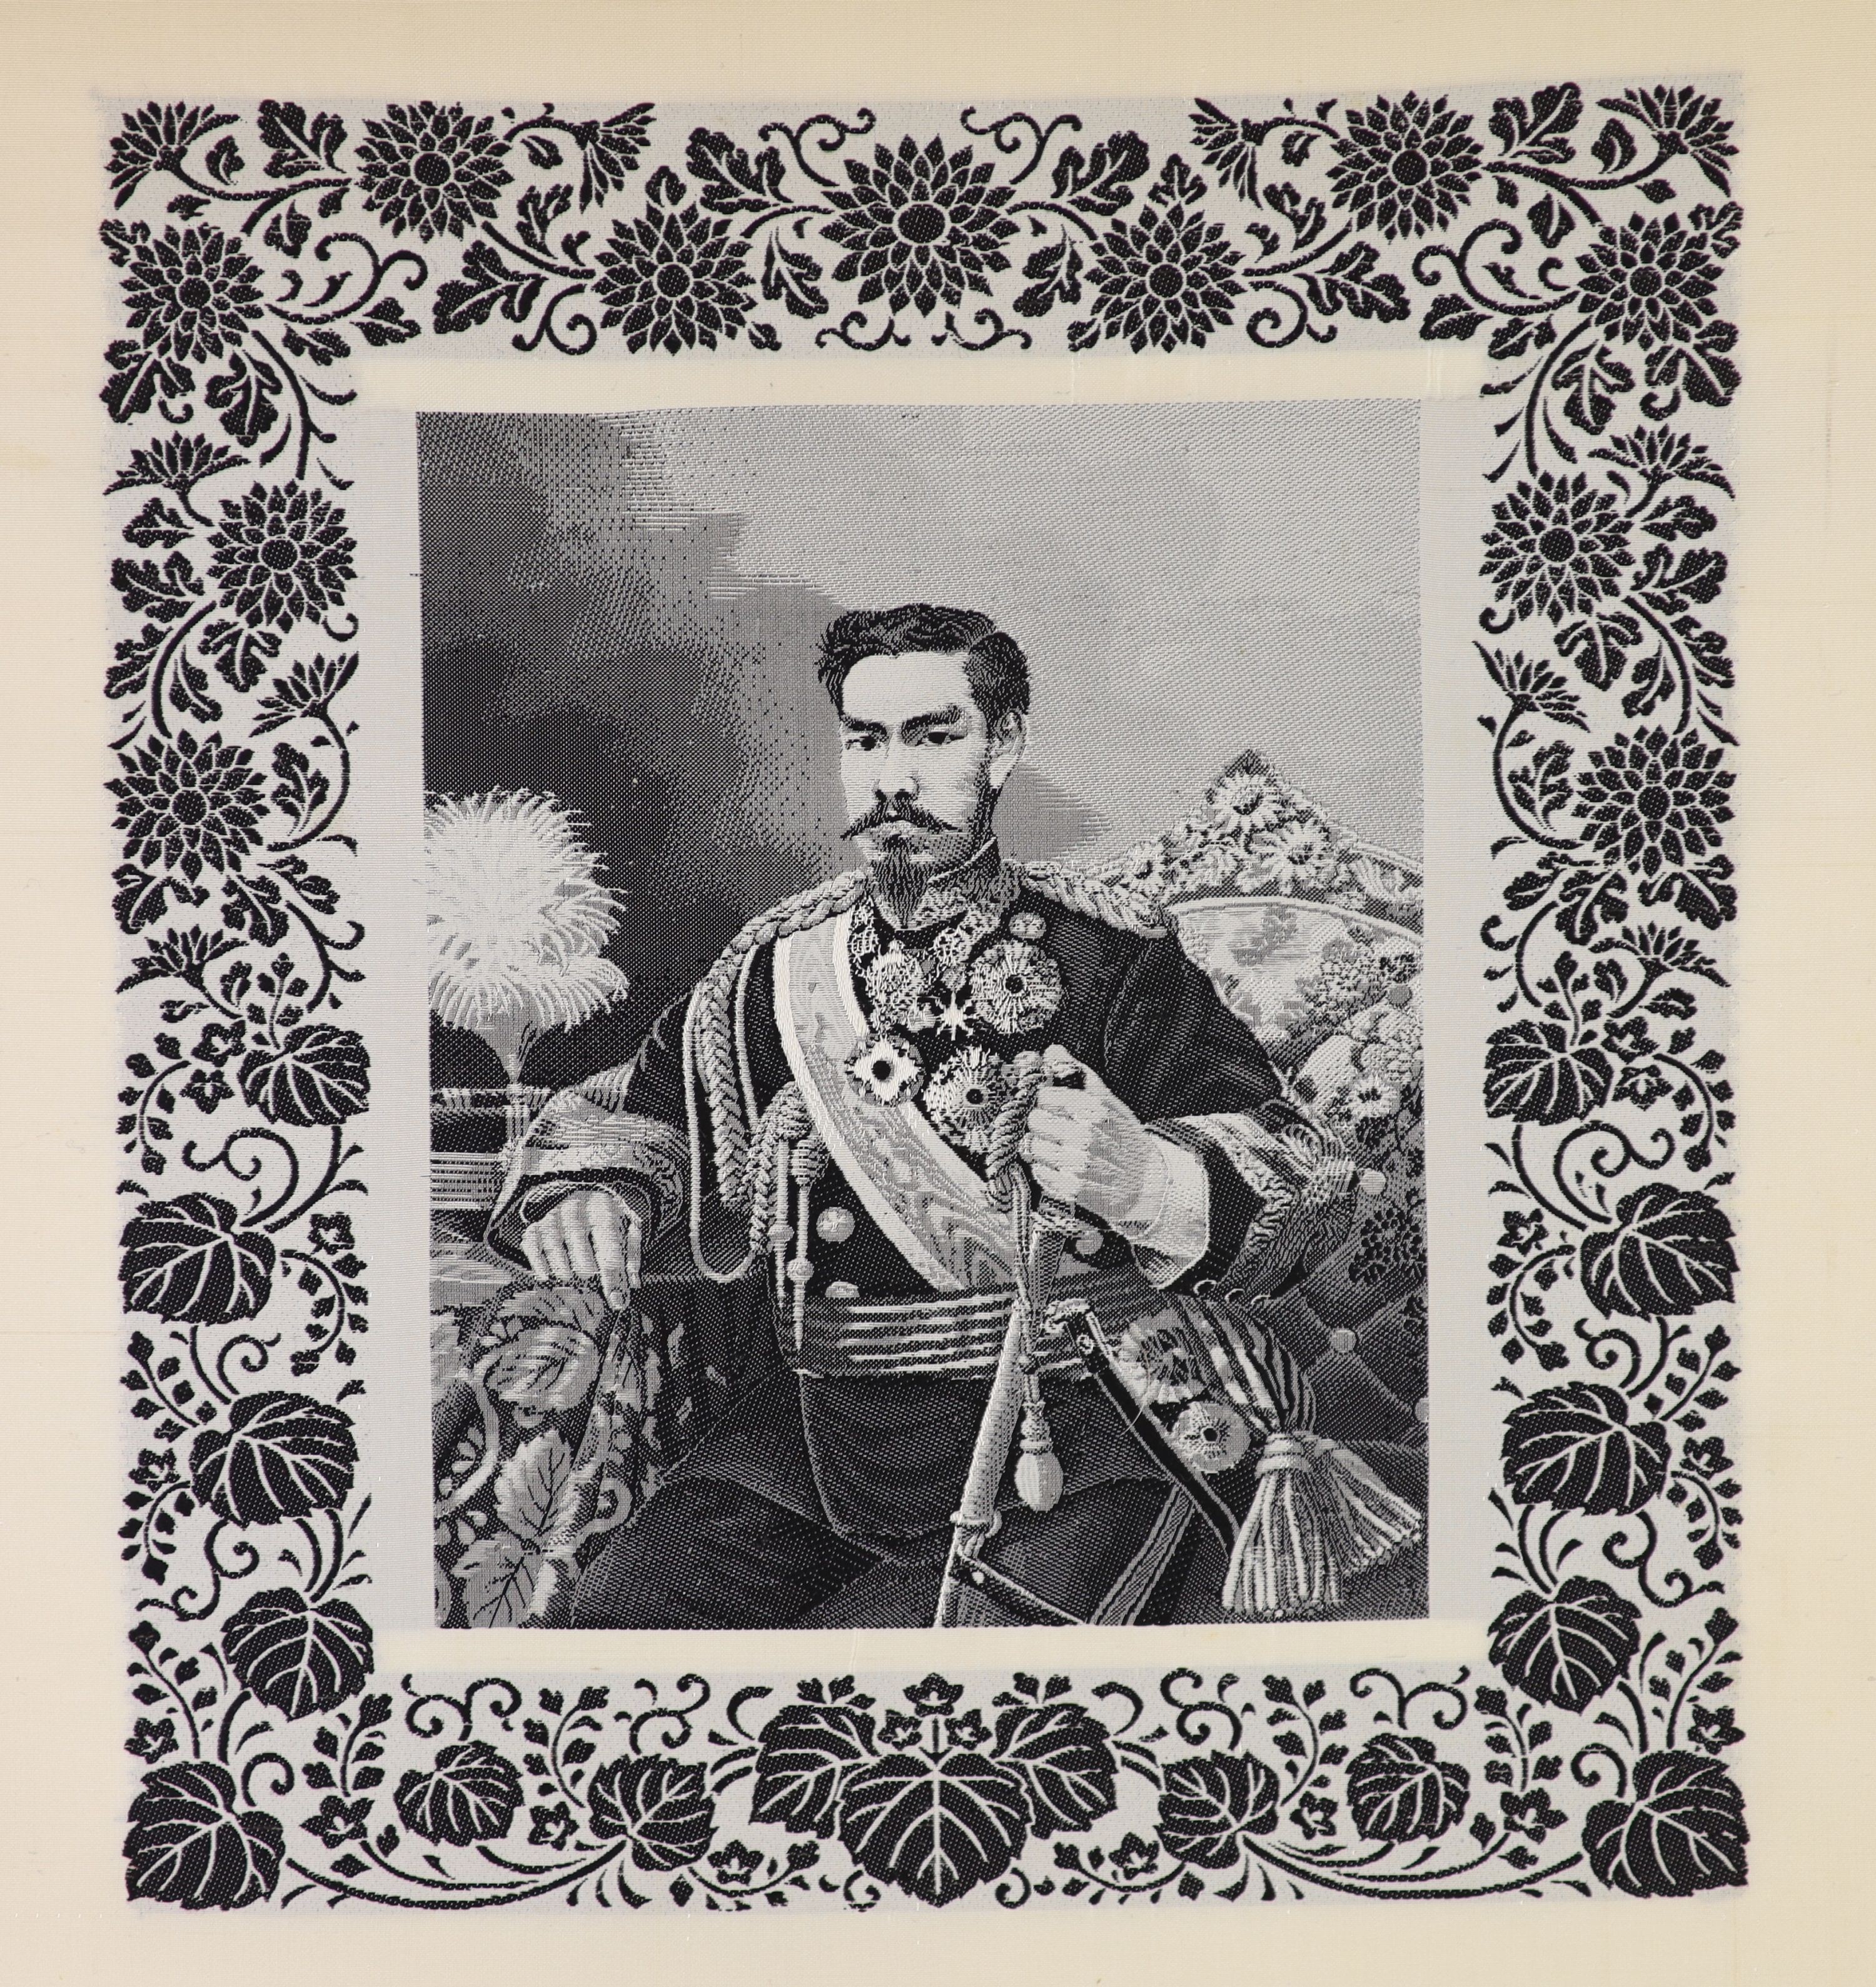 Emperor Meiji (1852-1912) A ‘phototexture’ portrait taken from a conté crayon drawing by Eduardo Chiossone in 1888. He drew two portraits which were to become the official images of the emperor.